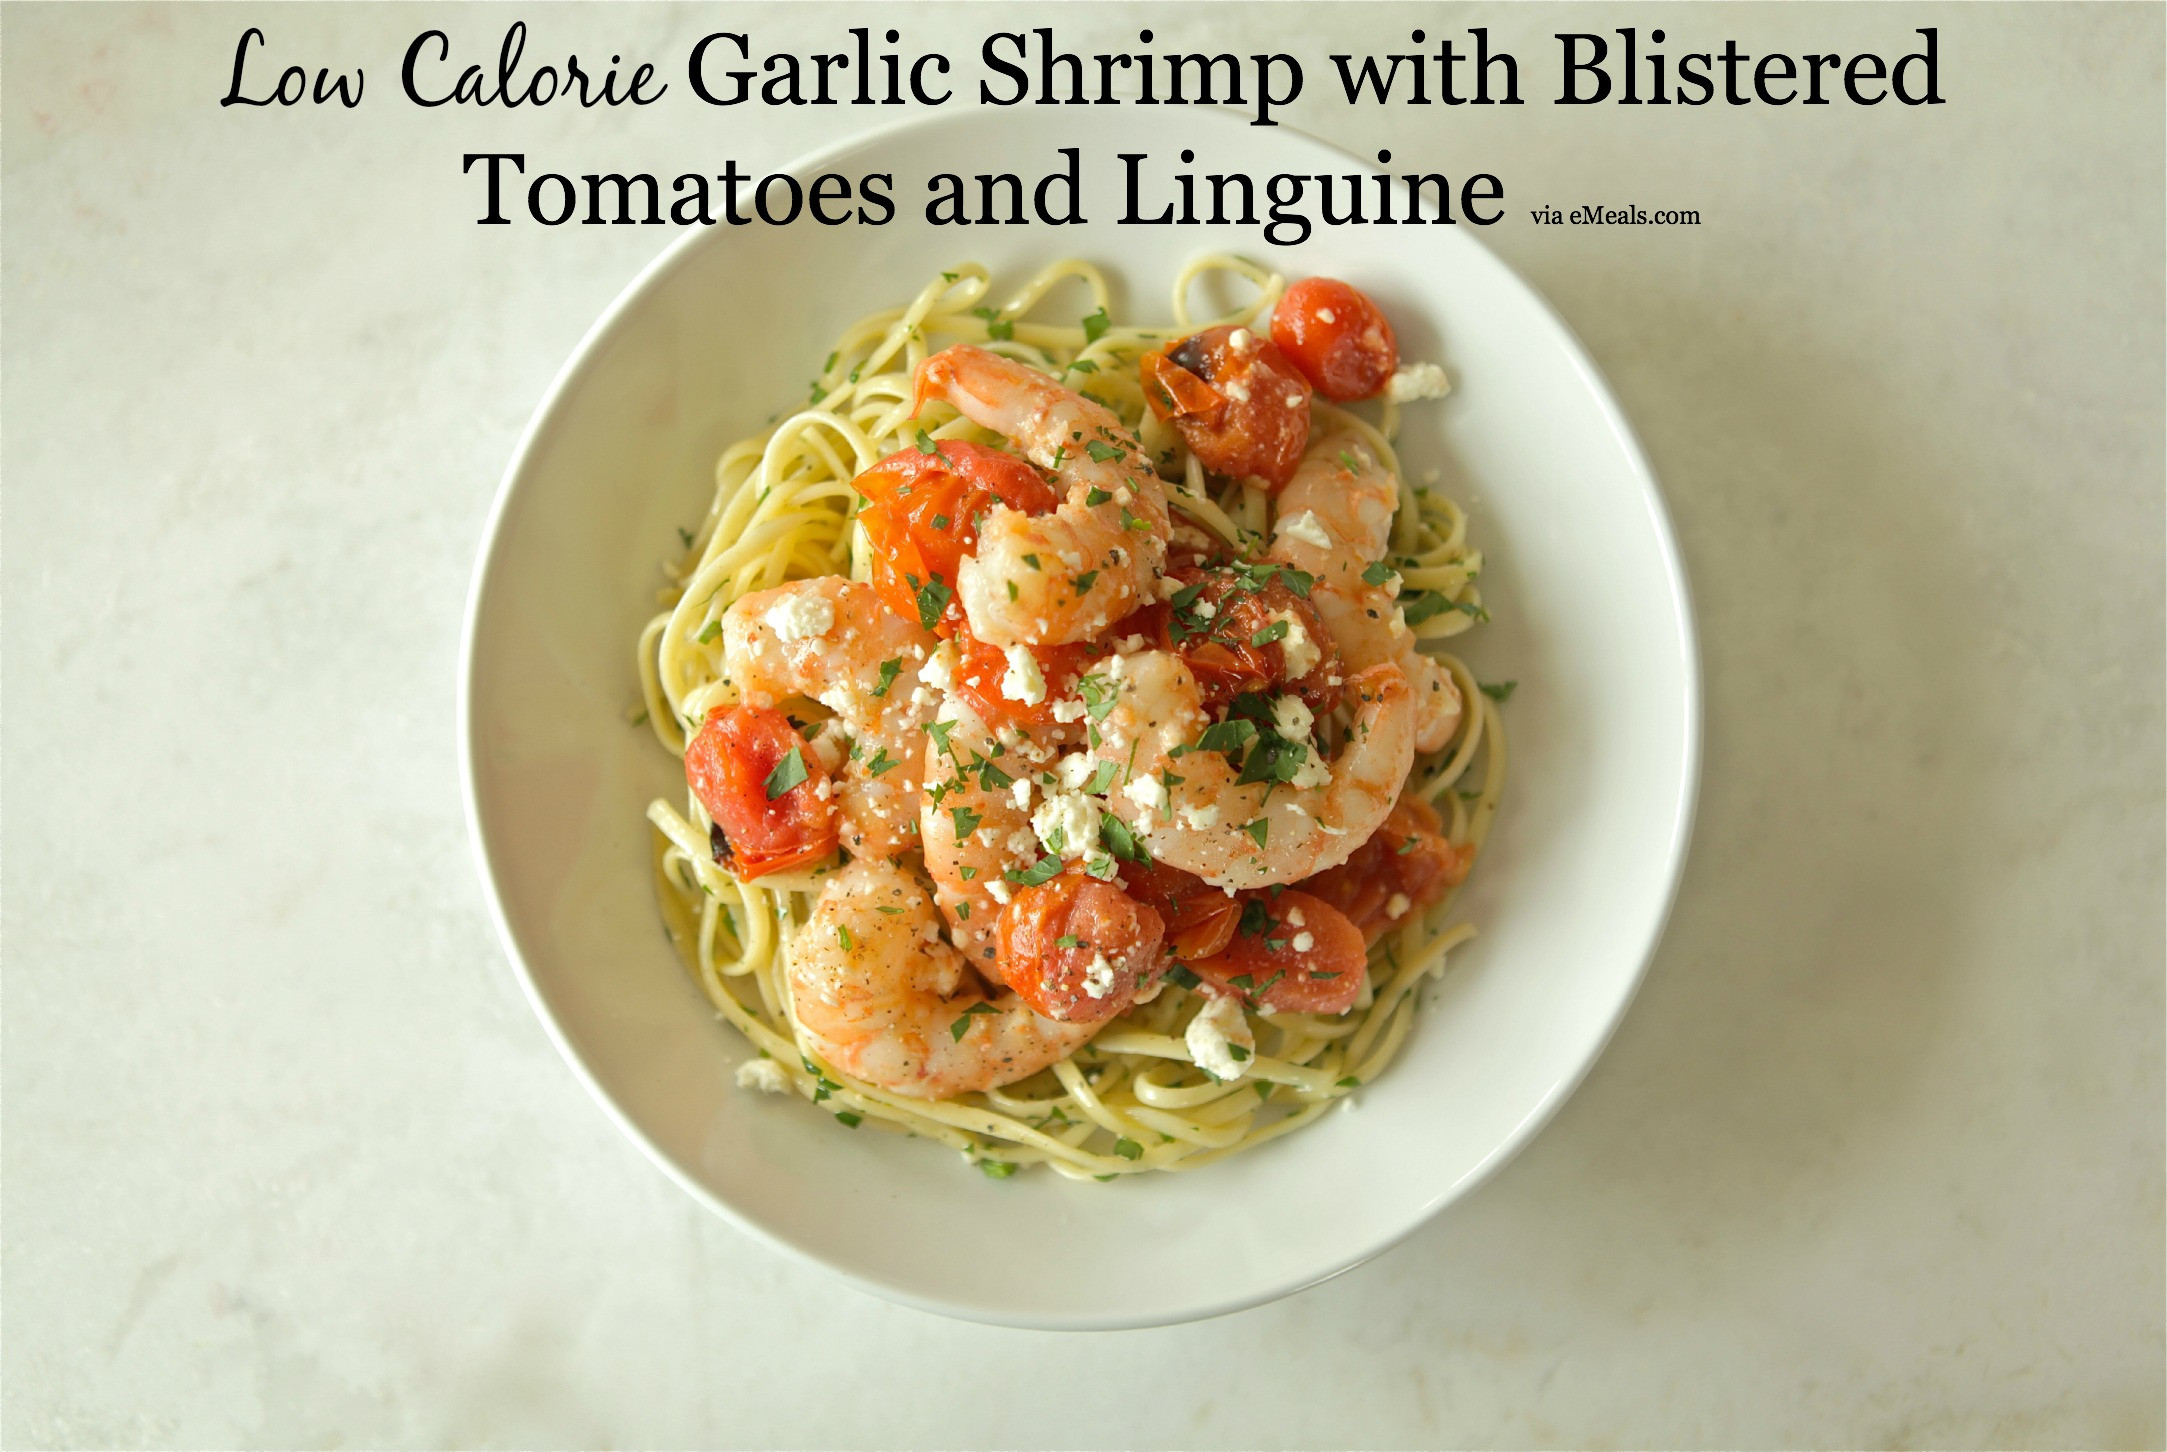 Low Calorie Seafood Recipes
 Low Calorie Dinner Recipe Garlic Shrimp with Blistered